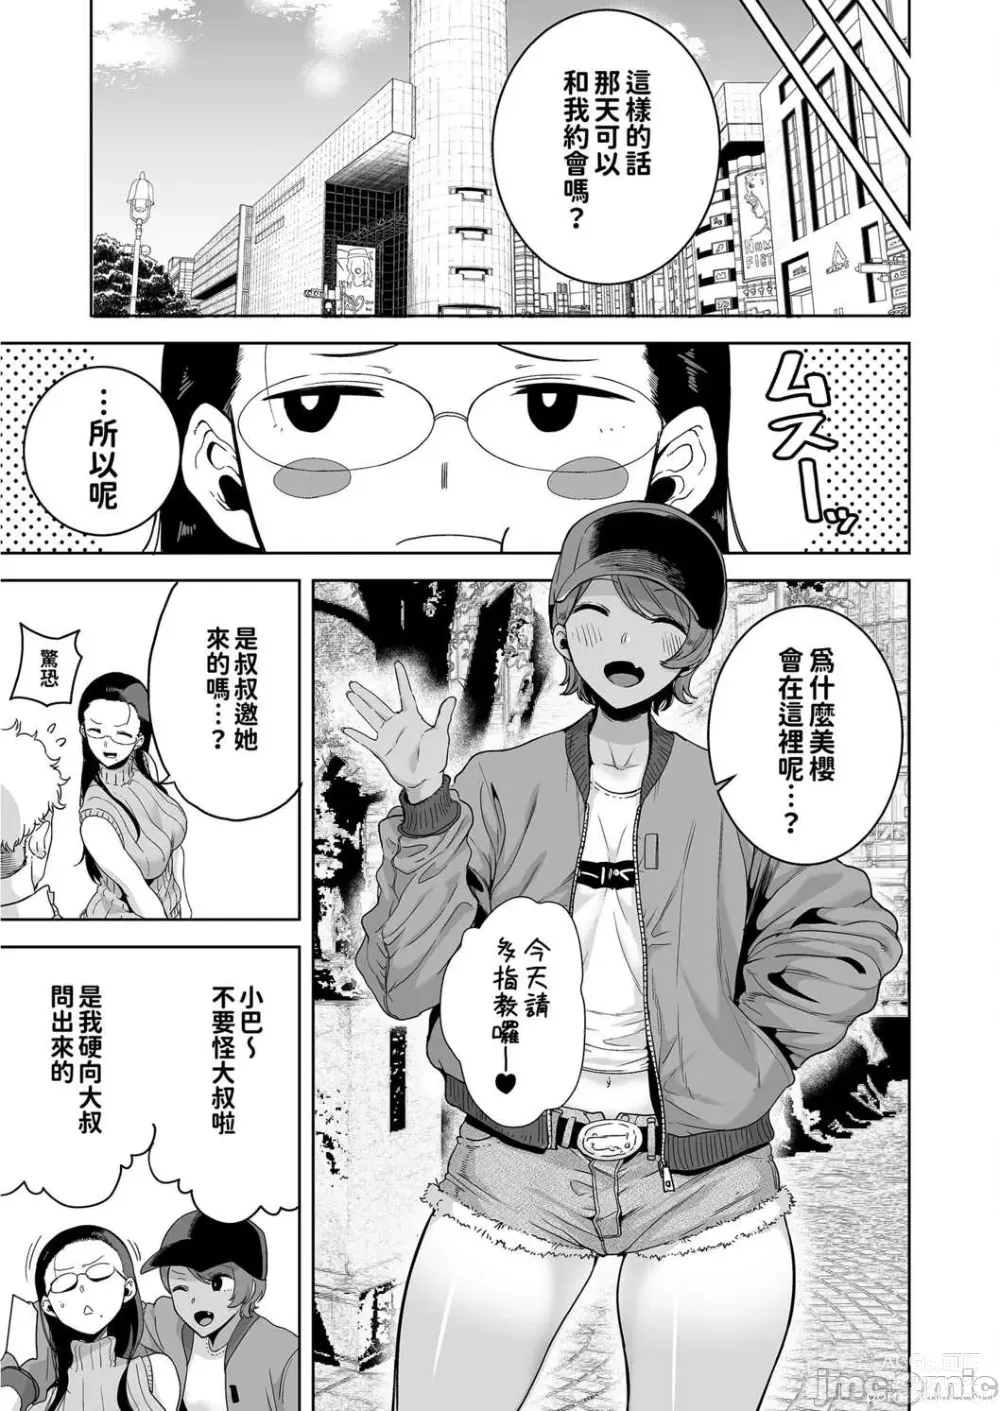 Page 5 of doujinshi 聖華女学院高等部公認竿おじさん 3